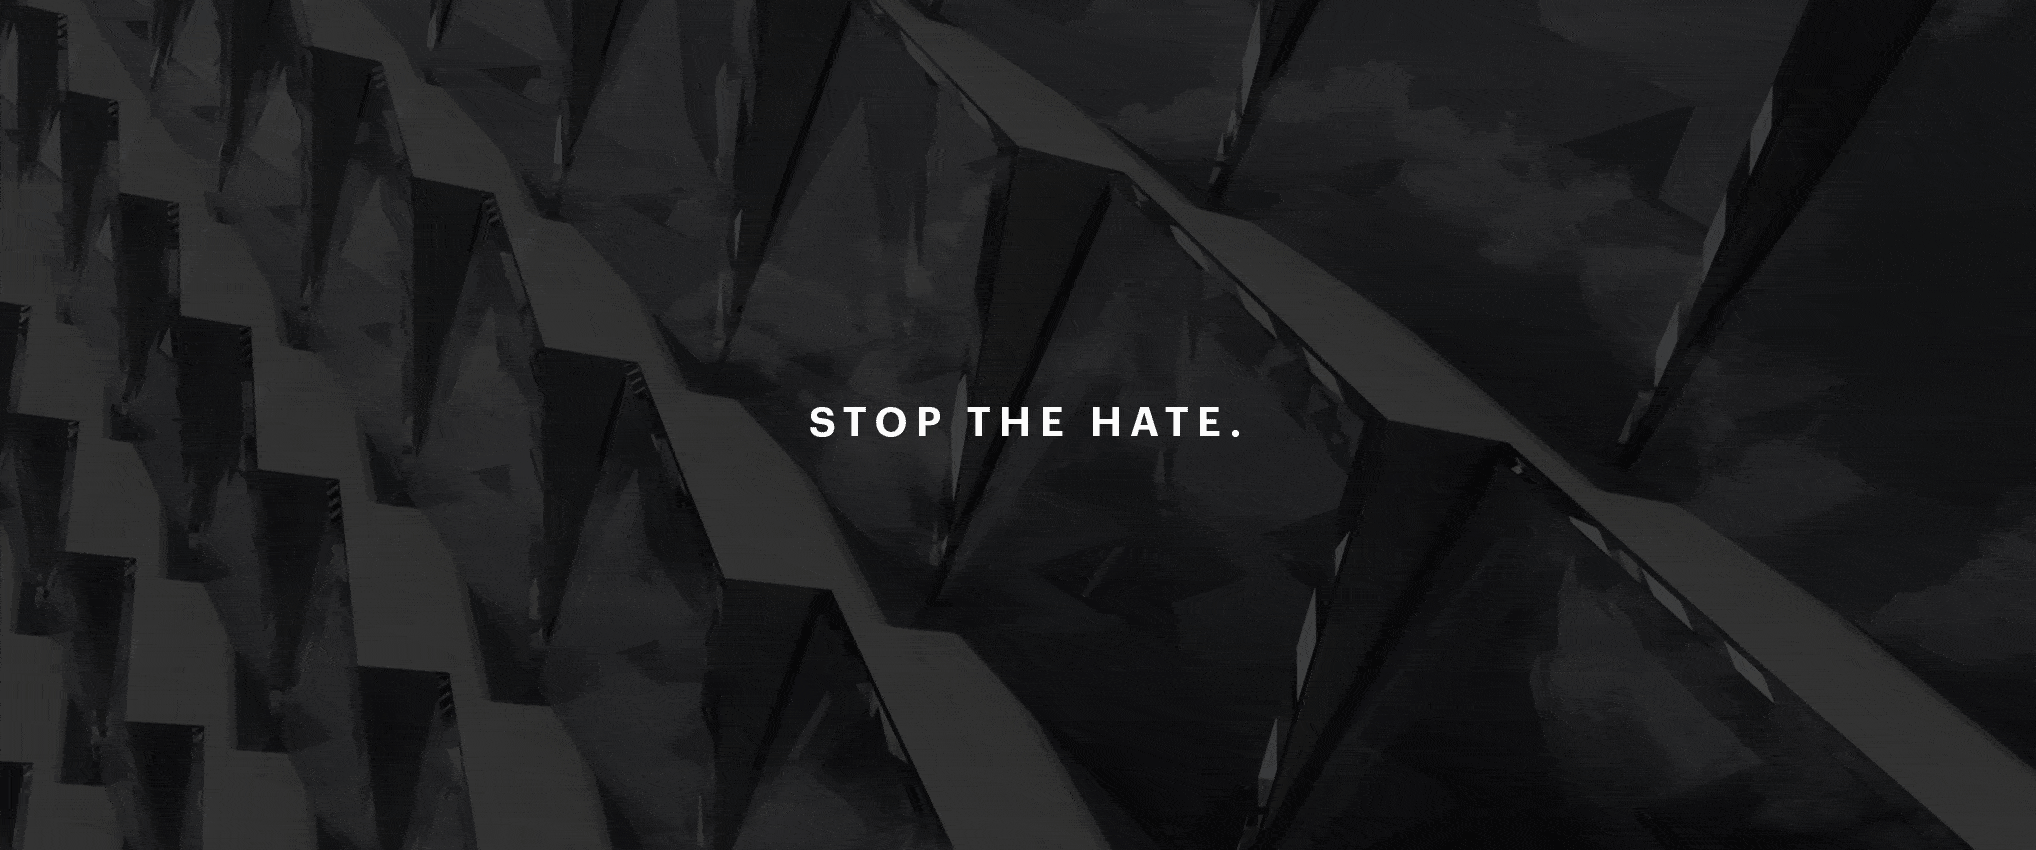 Hate, Violence Must Stop Now